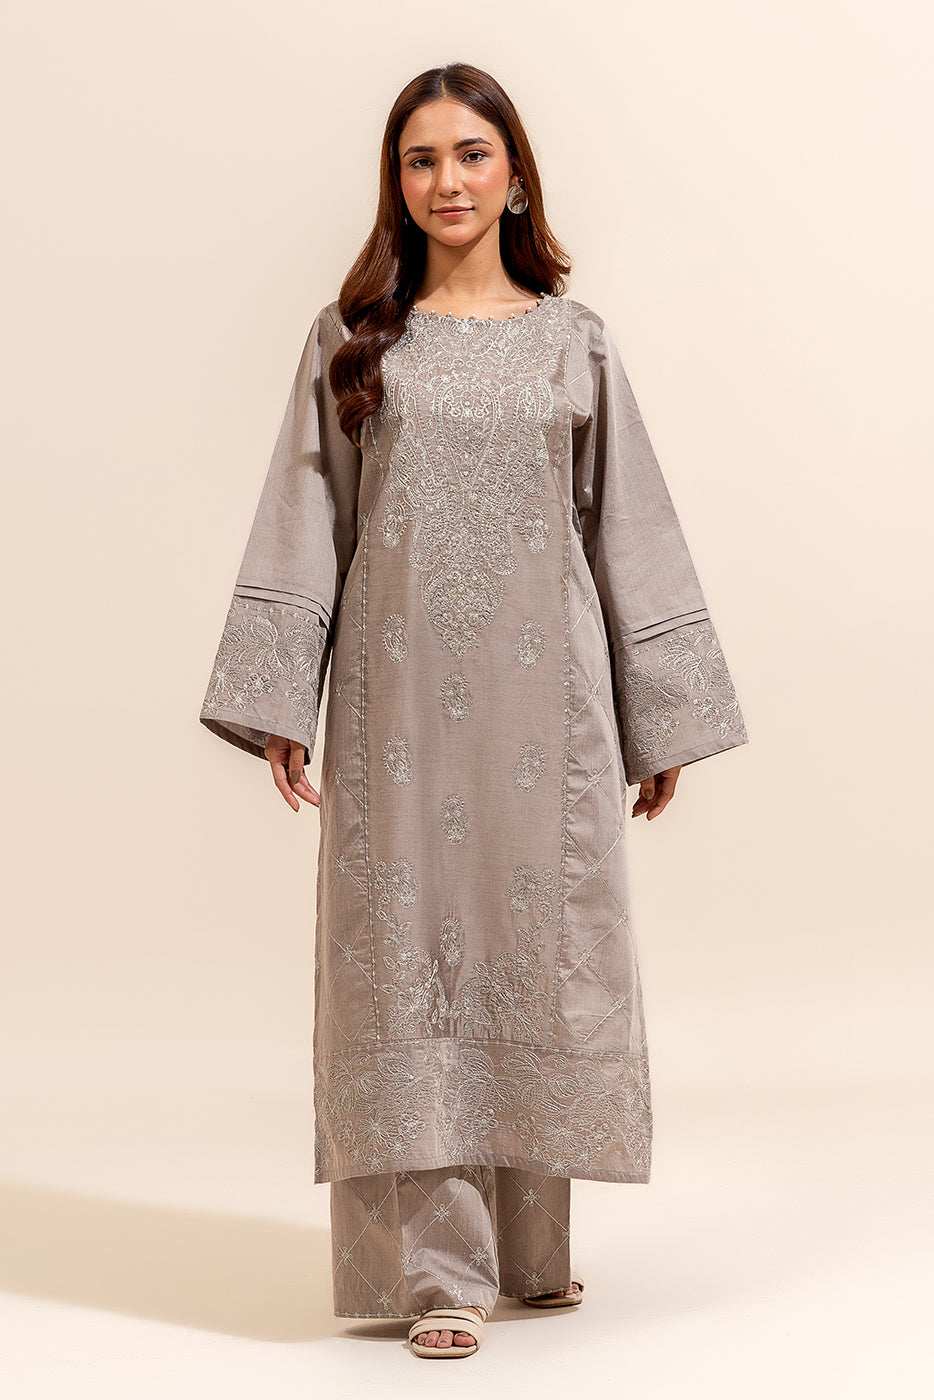 2 PIECE EMBROIDERED TWO TONE SUIT-HARBOR GREY (UNSTITCHED)